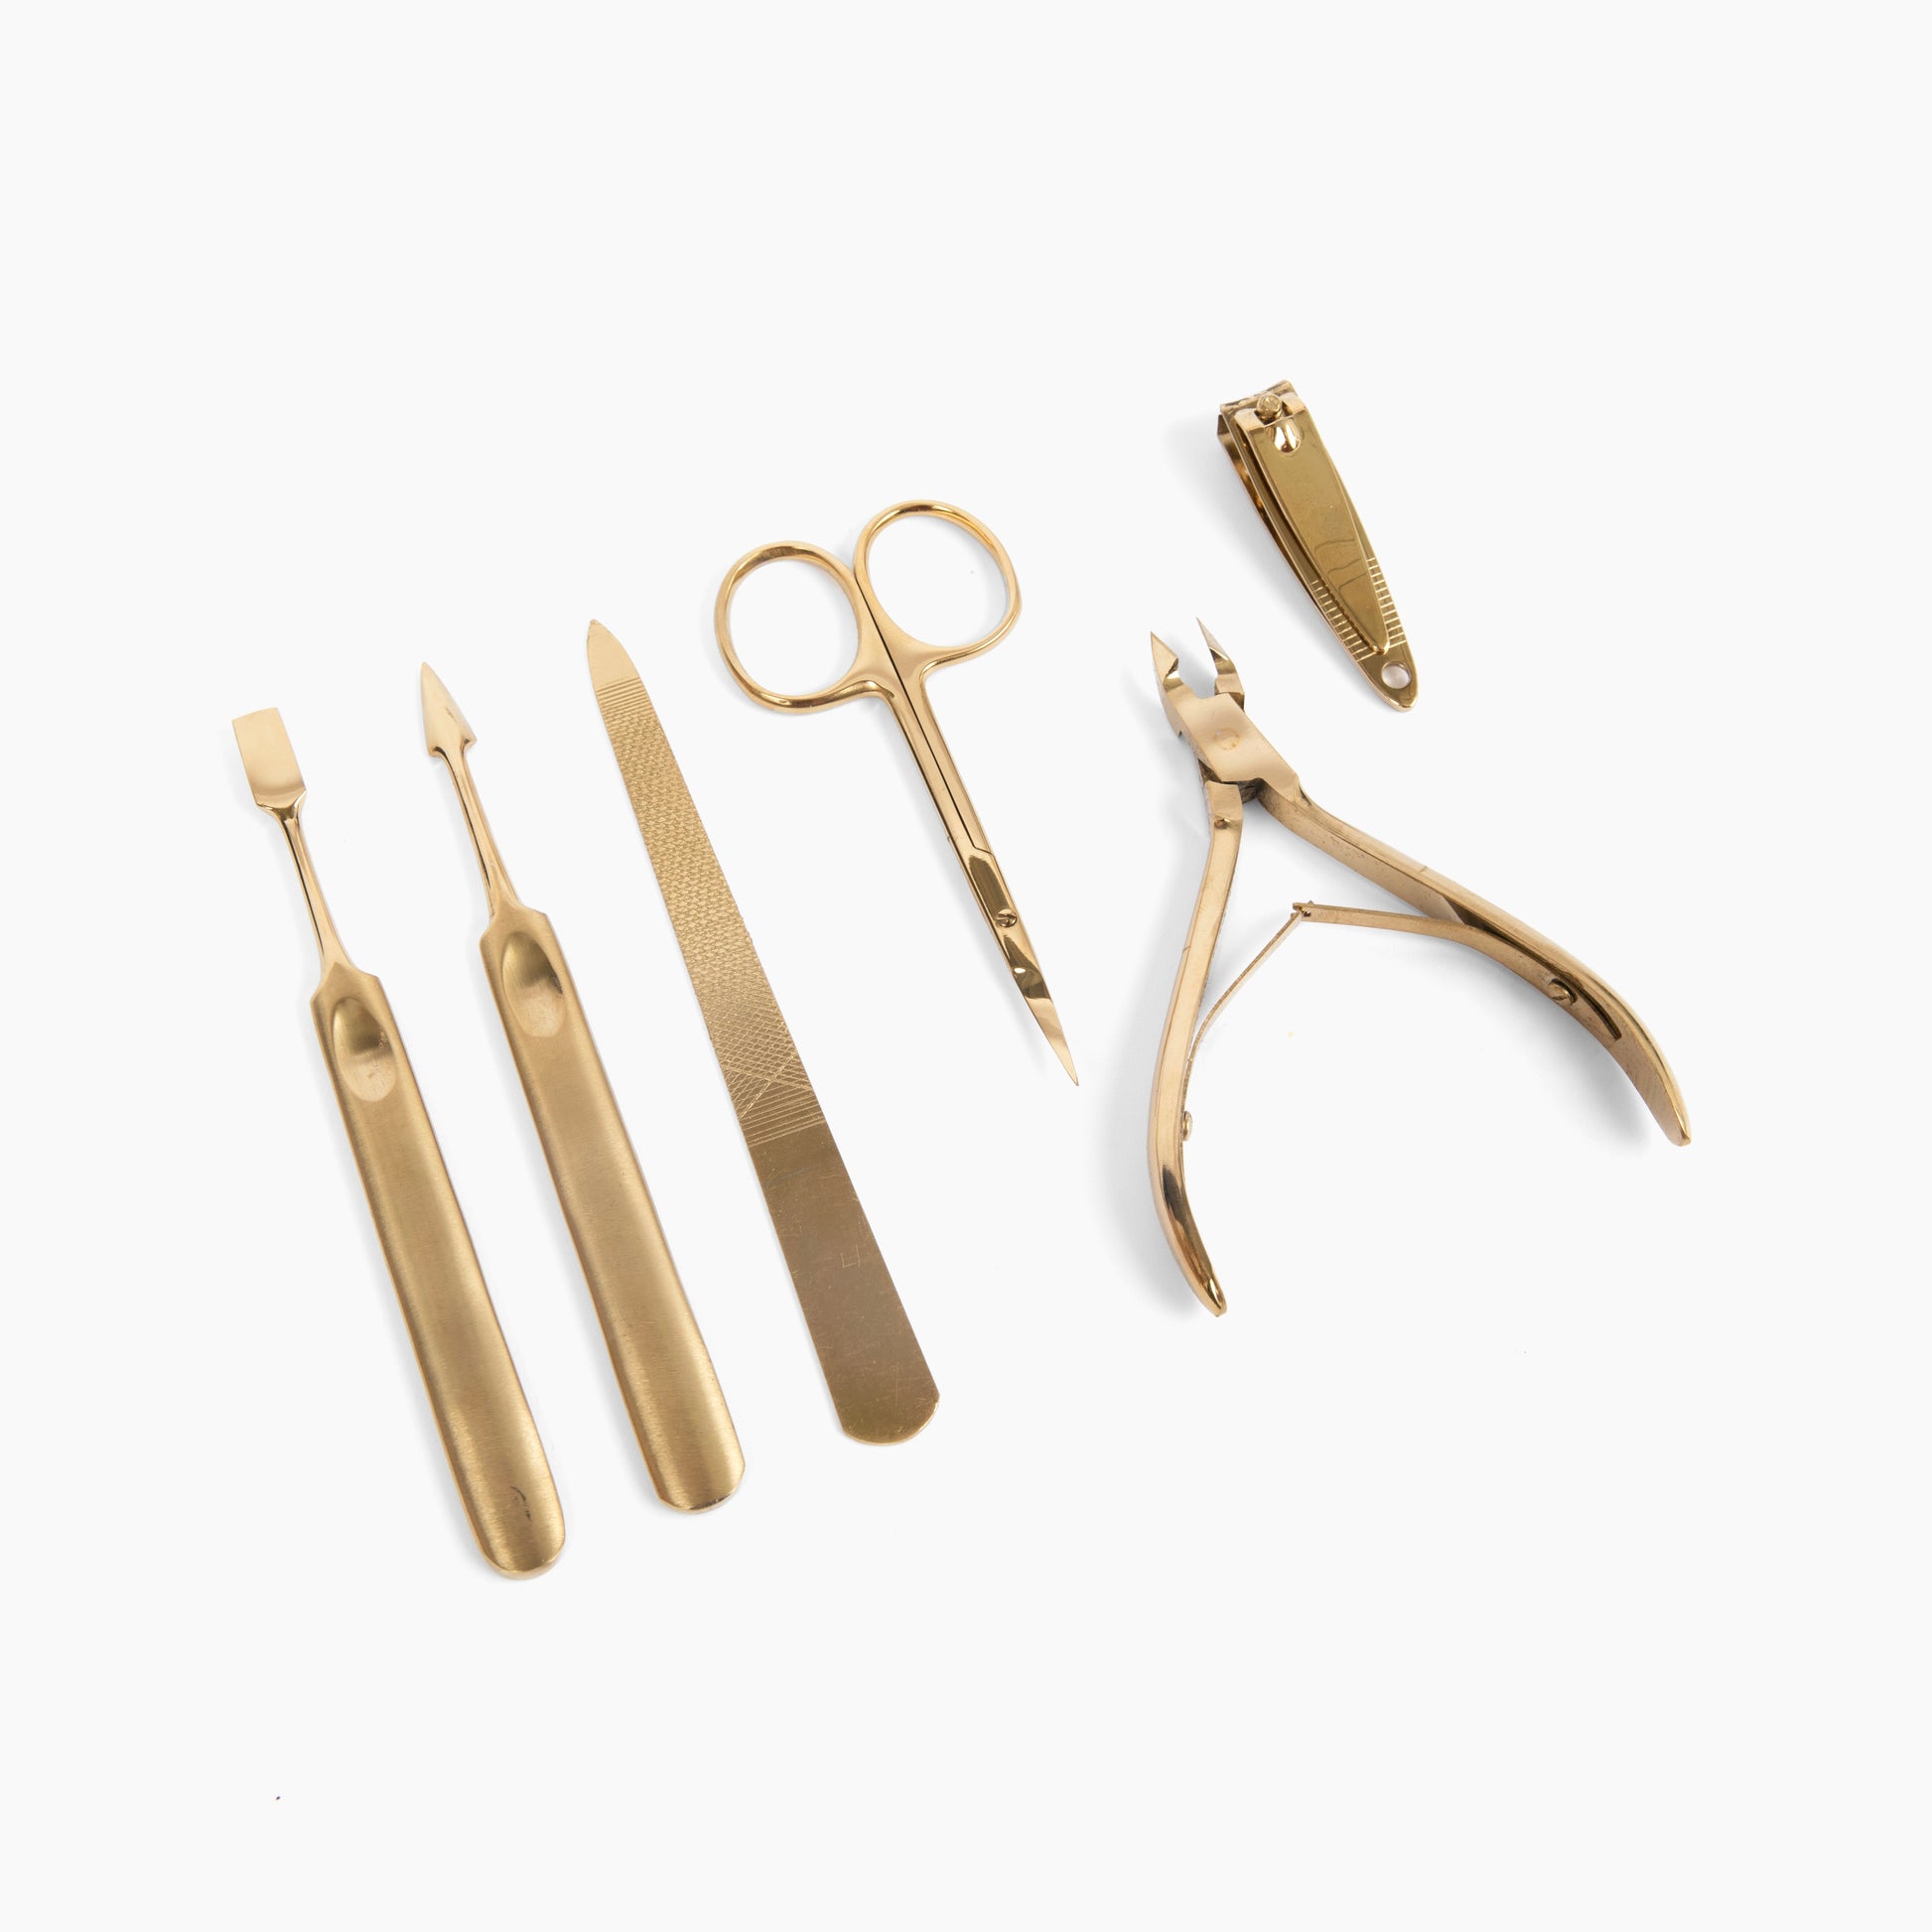 manicure tools. on a white background, a six piece gold manicure set is laid out.